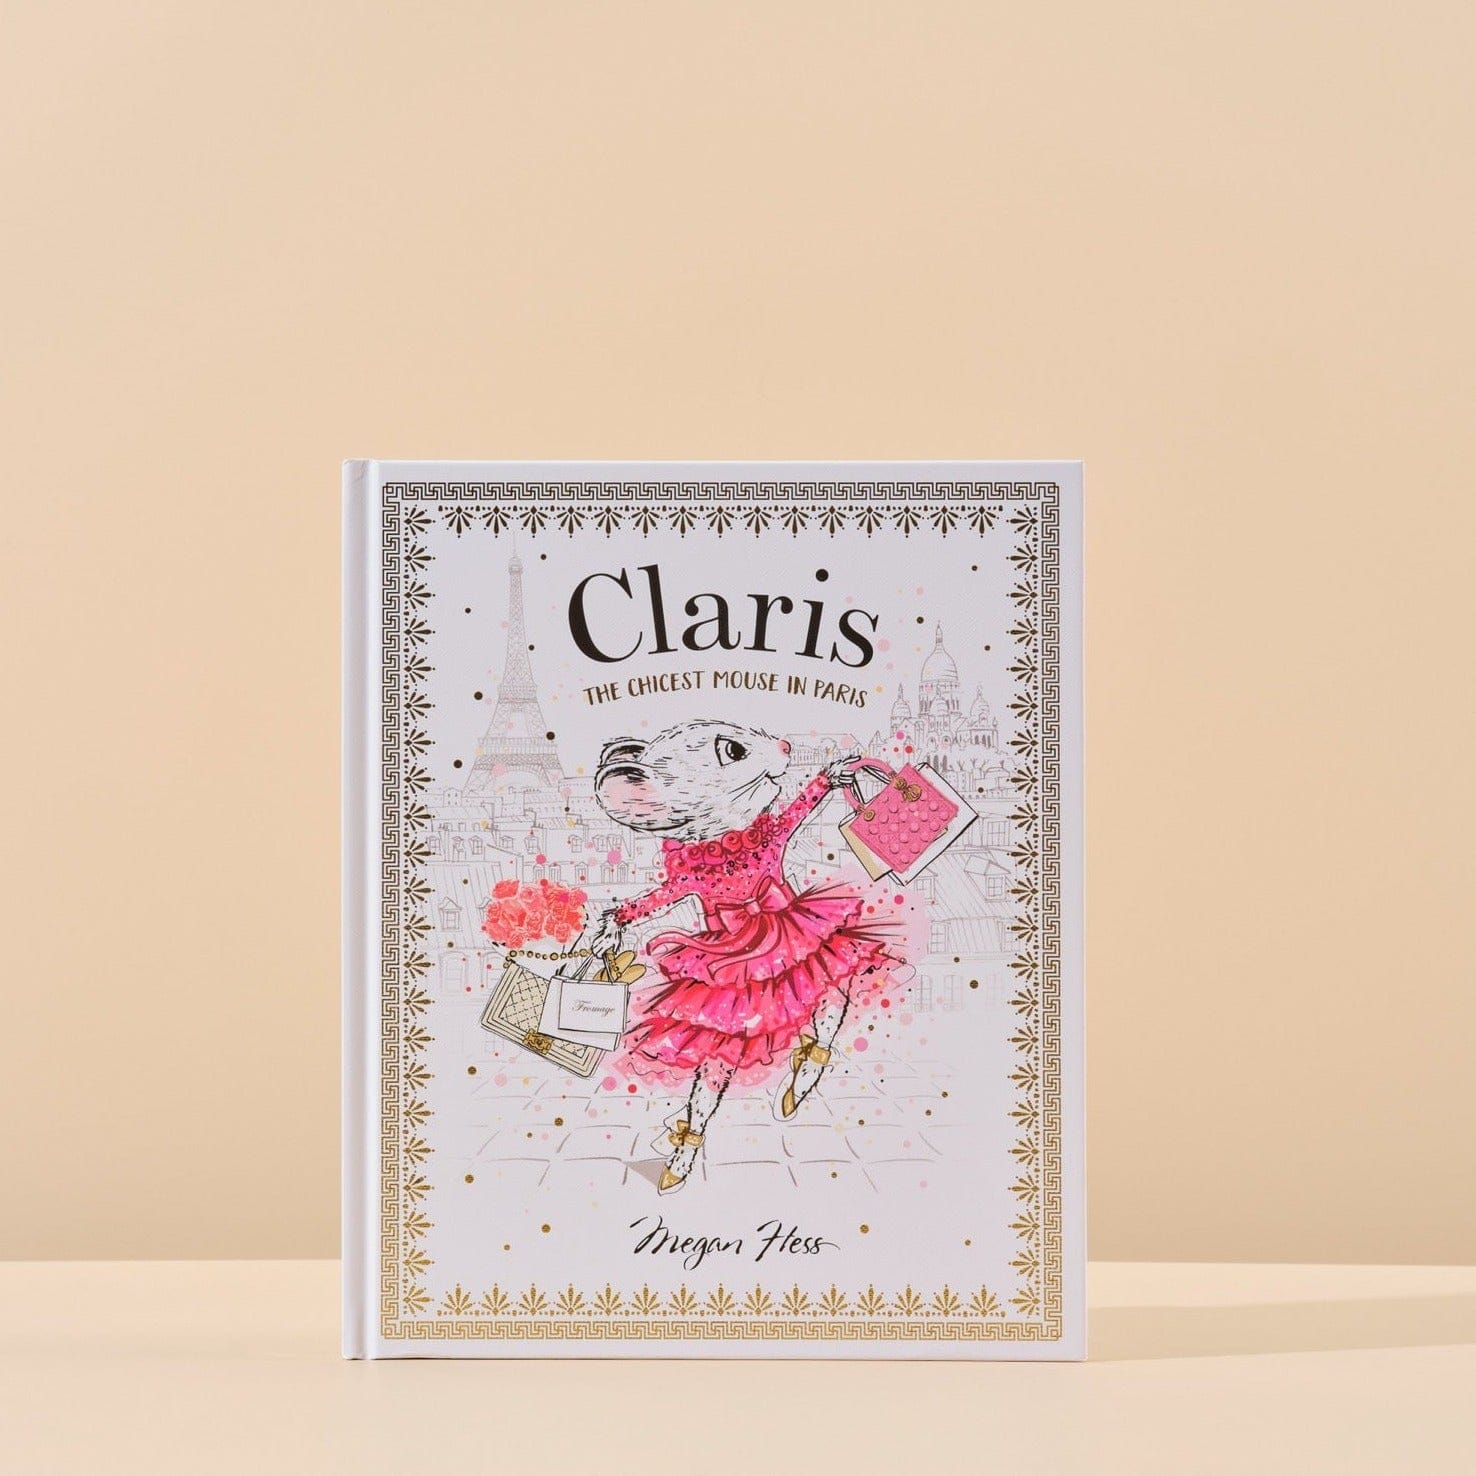 This image features the cover of Claris the Chicest Mouse in Paris written by Megan Hess that is included in Handsel's Champagne Baby Showers gift bundle. The image is shot with a natural background.